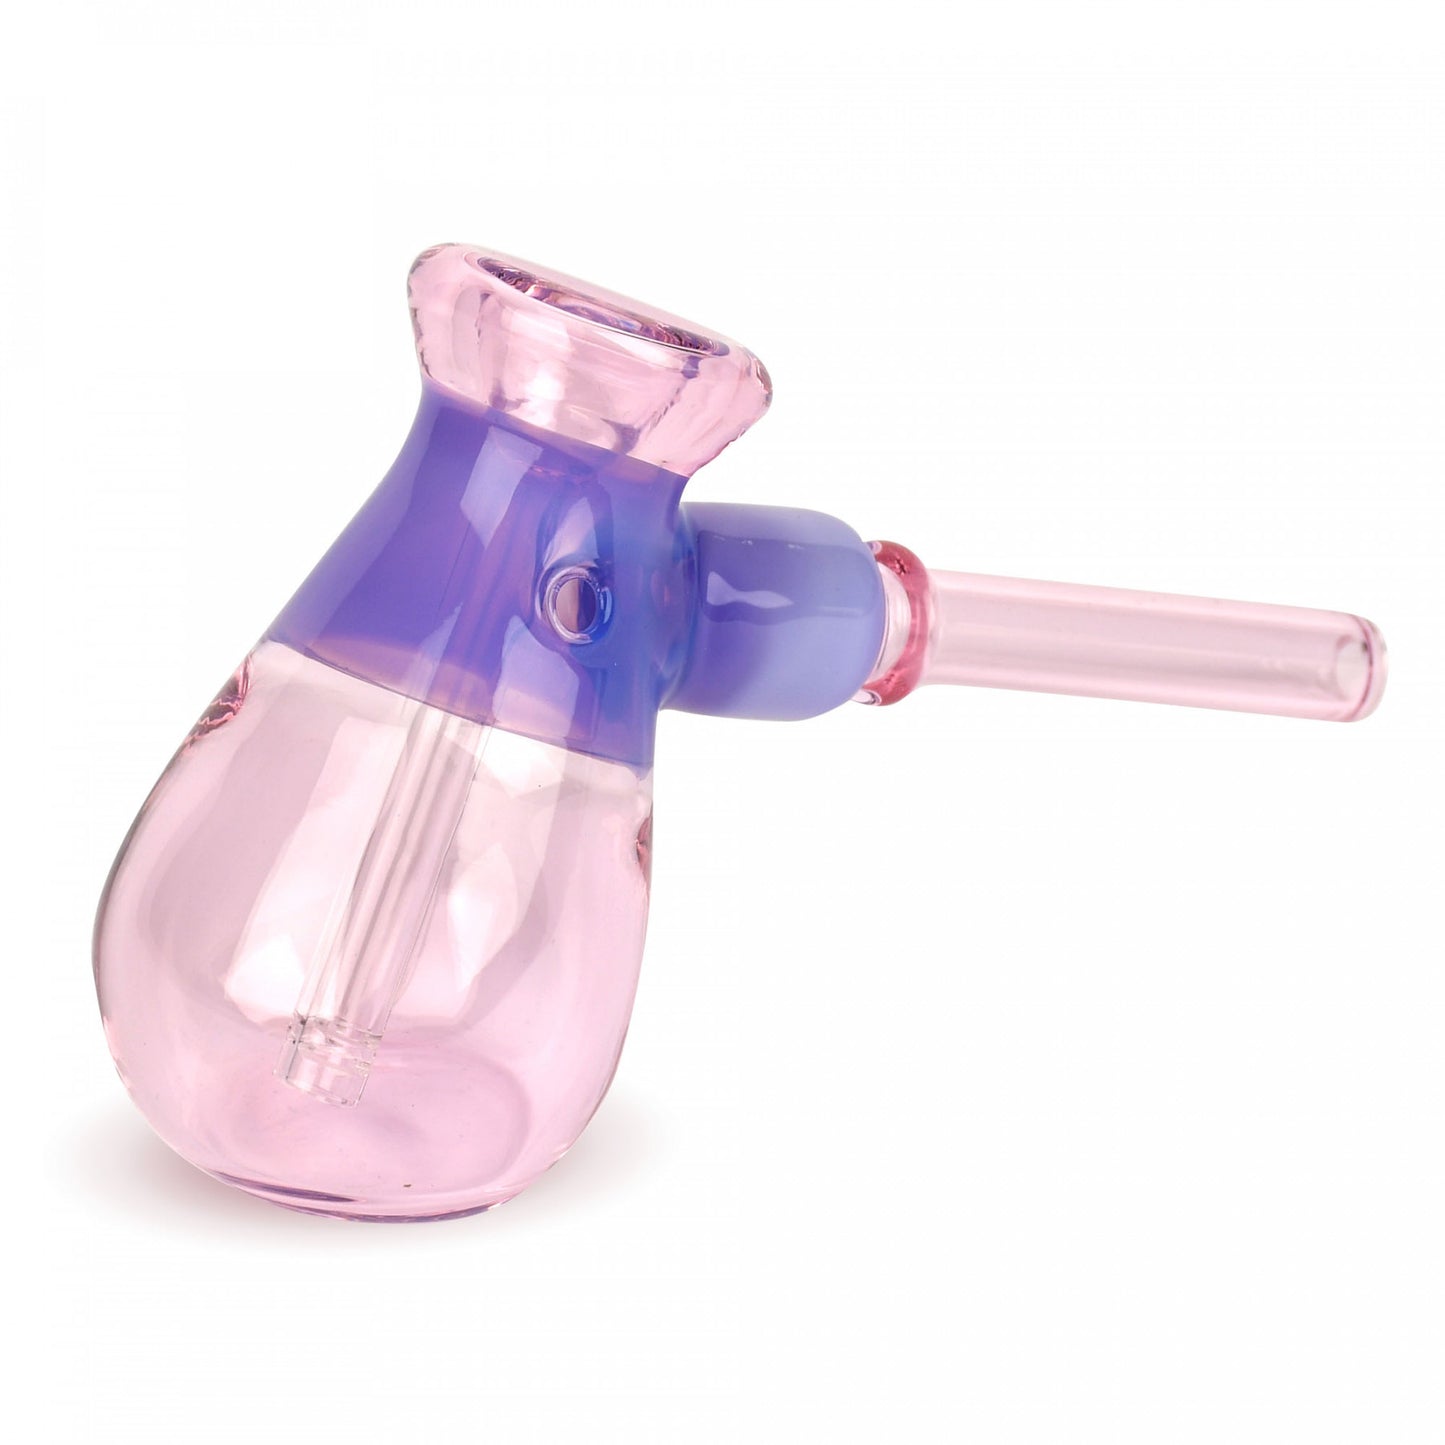 Red Eye Glass 4.5" Colour Block Hammer Bubbler in Pink with Purple Accents